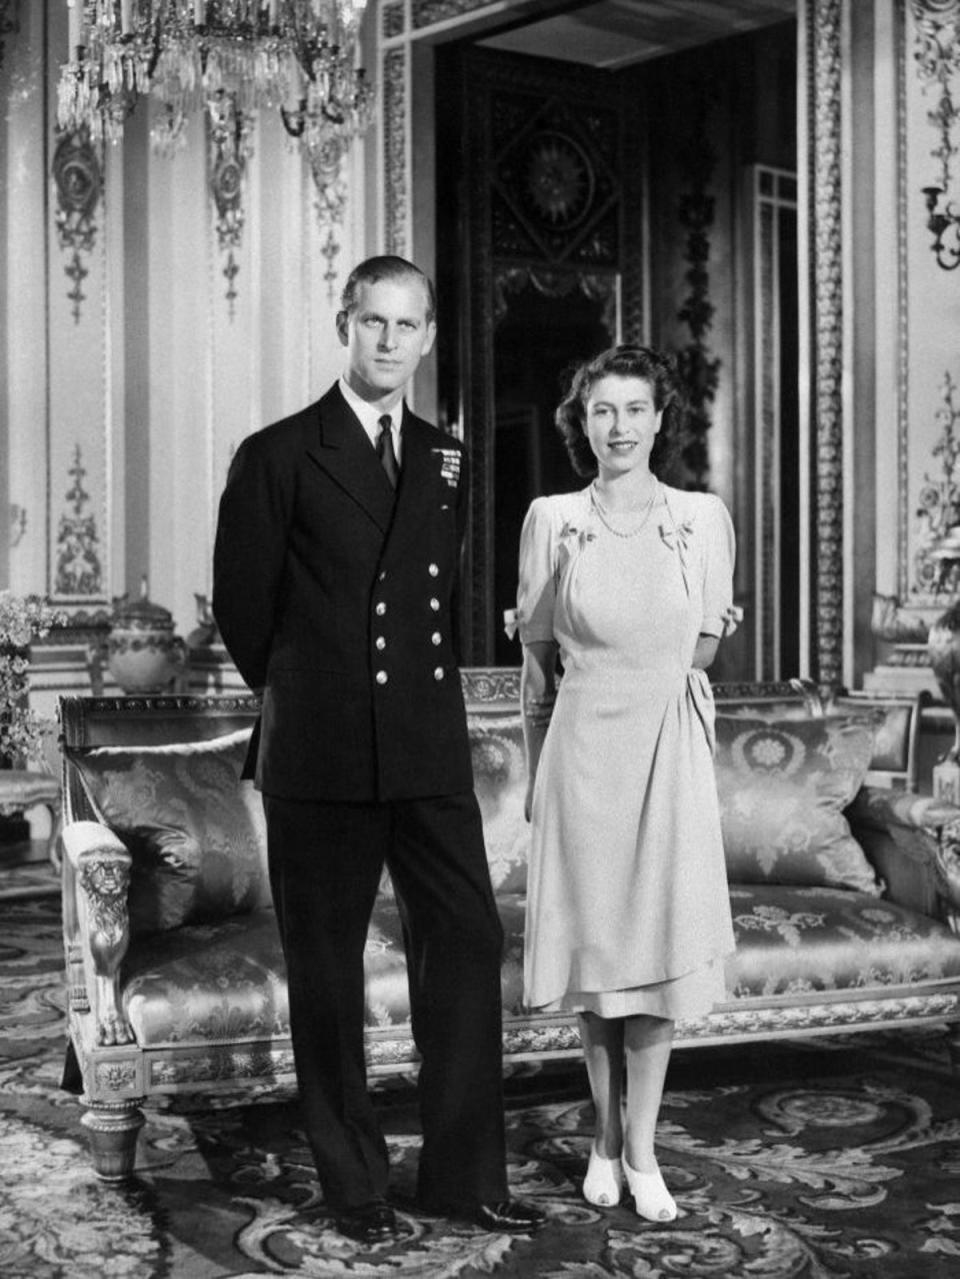 The official announcement of Princess Elizabeth and Philip Mountbatten's engagement in 1947 (Getty)